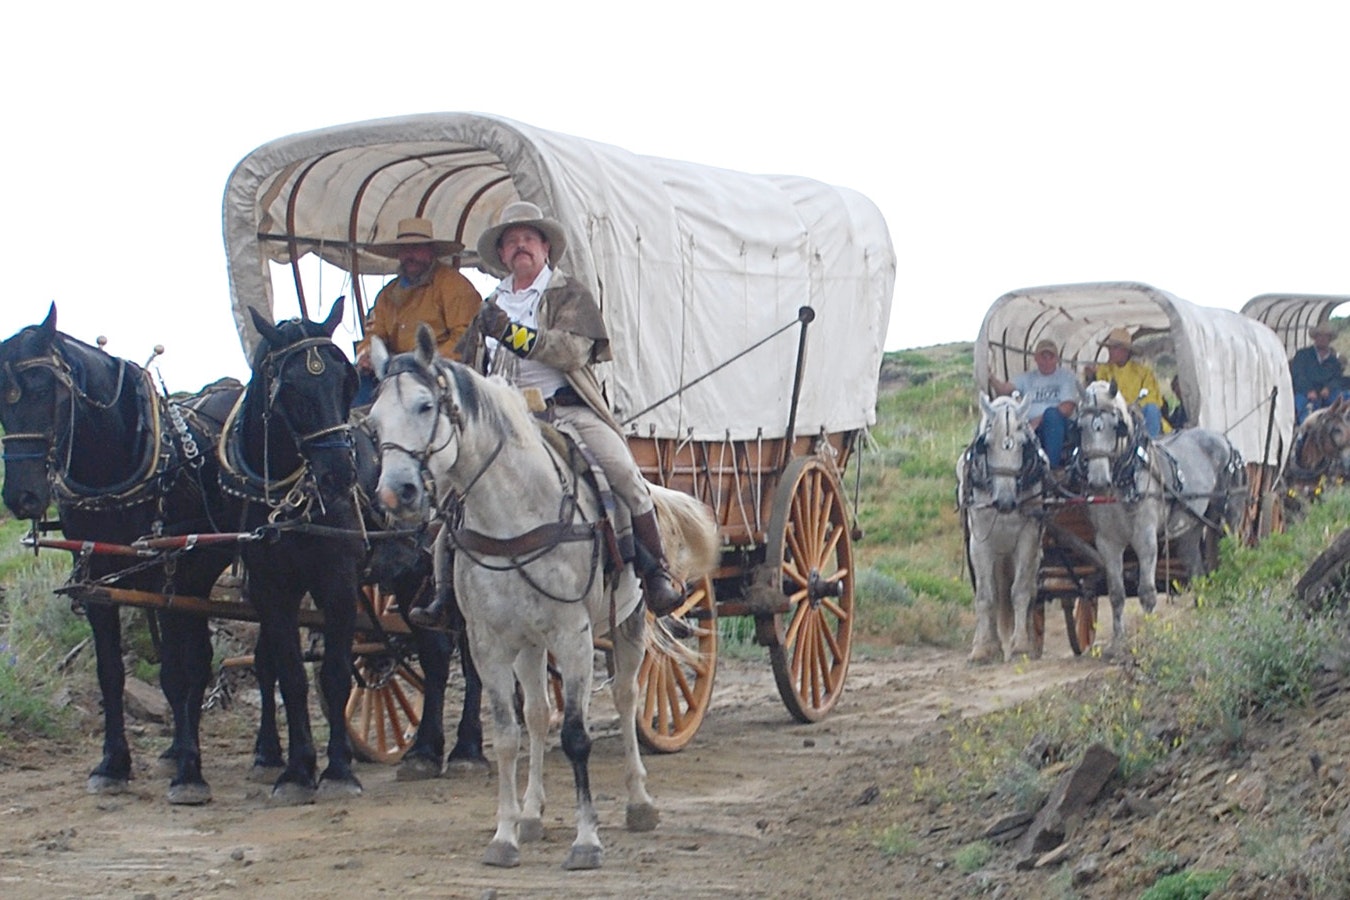 Wagon rides along the Oregon Trail in Wyoming is one of the authentic Western experiences international tourism officials will experience when in the Cowboy State next year. This ride is led by Morris Carter, who owns Historic Trails West in Casper.